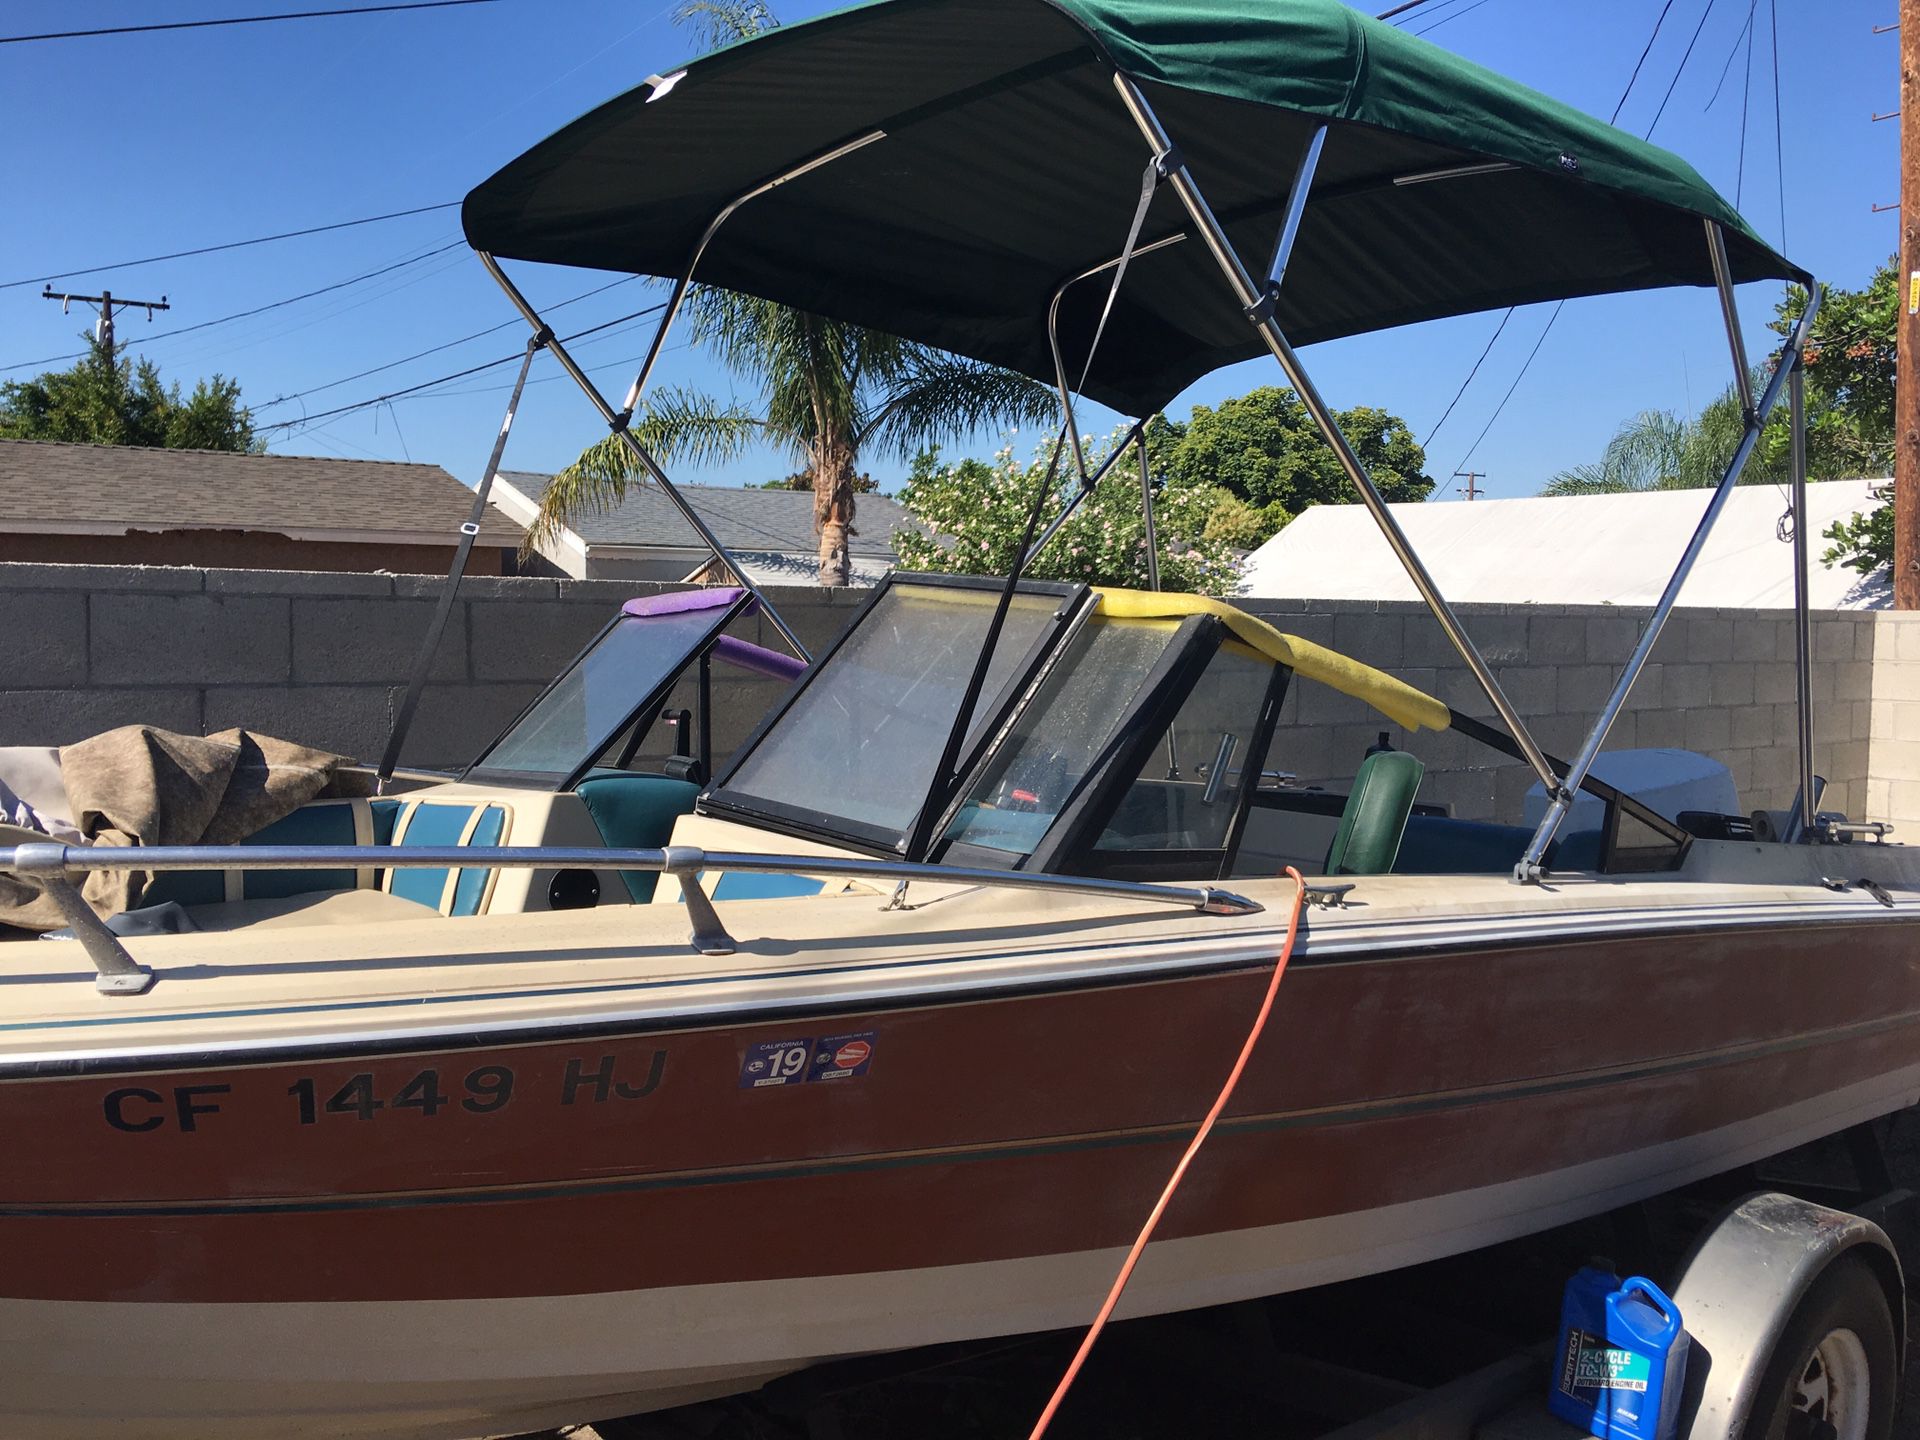 1983 monark with 140hp Johnson outboard